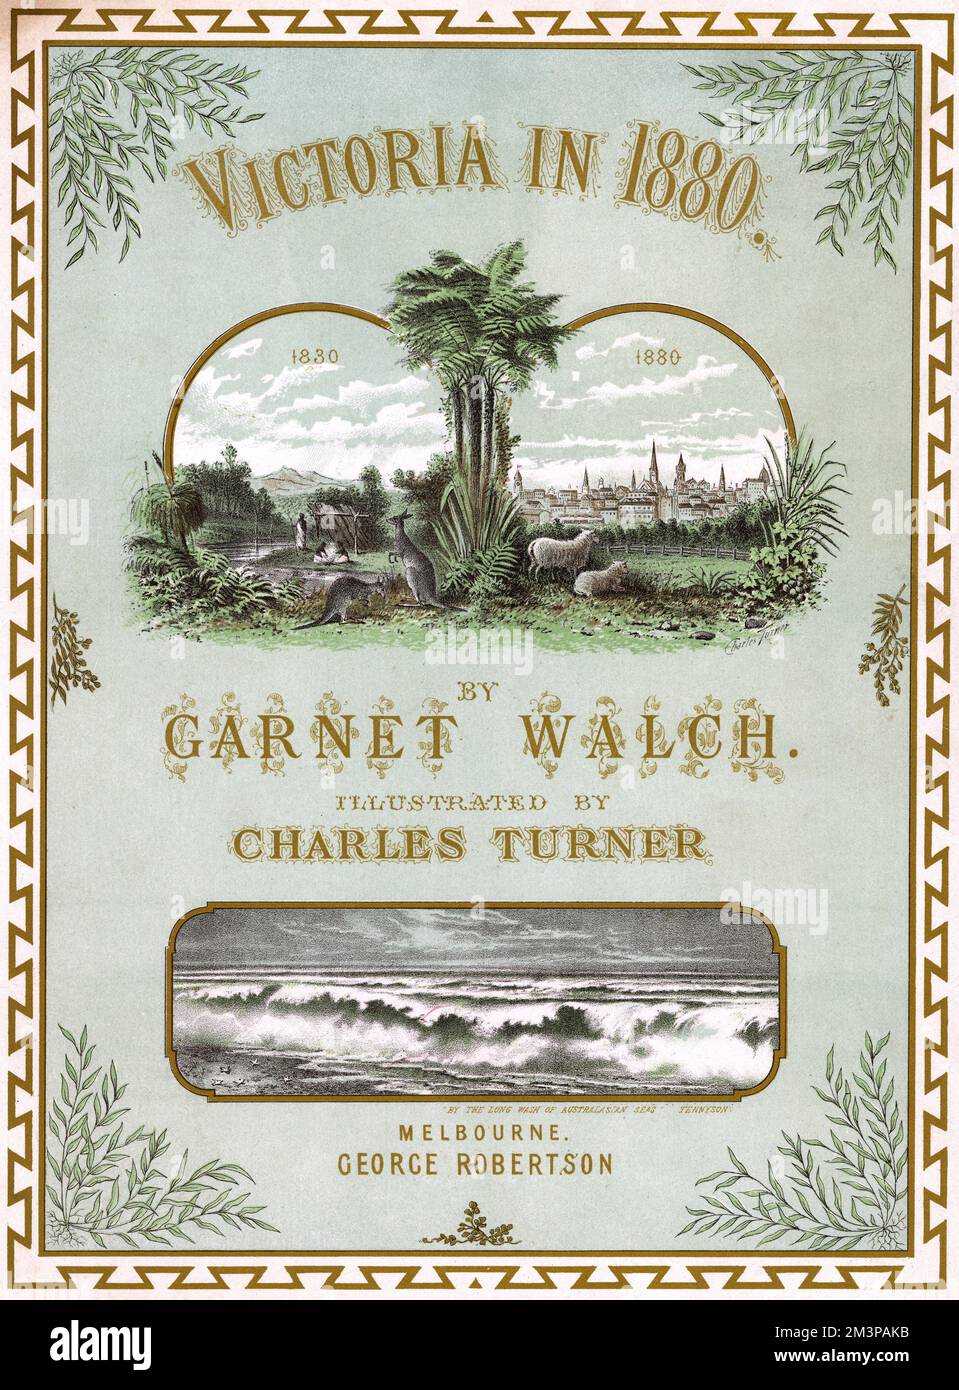 Presentation certificate for 'Victoria in 1880' by Garnet Walch. The book, with illustrations by Charles Turner, published in Melbourne by George Robertson, was brought out to coincide with the Melbourne International Exhibition between October 1880 and April 1881. The certificate features vignettes of Victoria in 1830 and 1880 showing the changing Australian landscape.     Date: 1880 Stock Photo